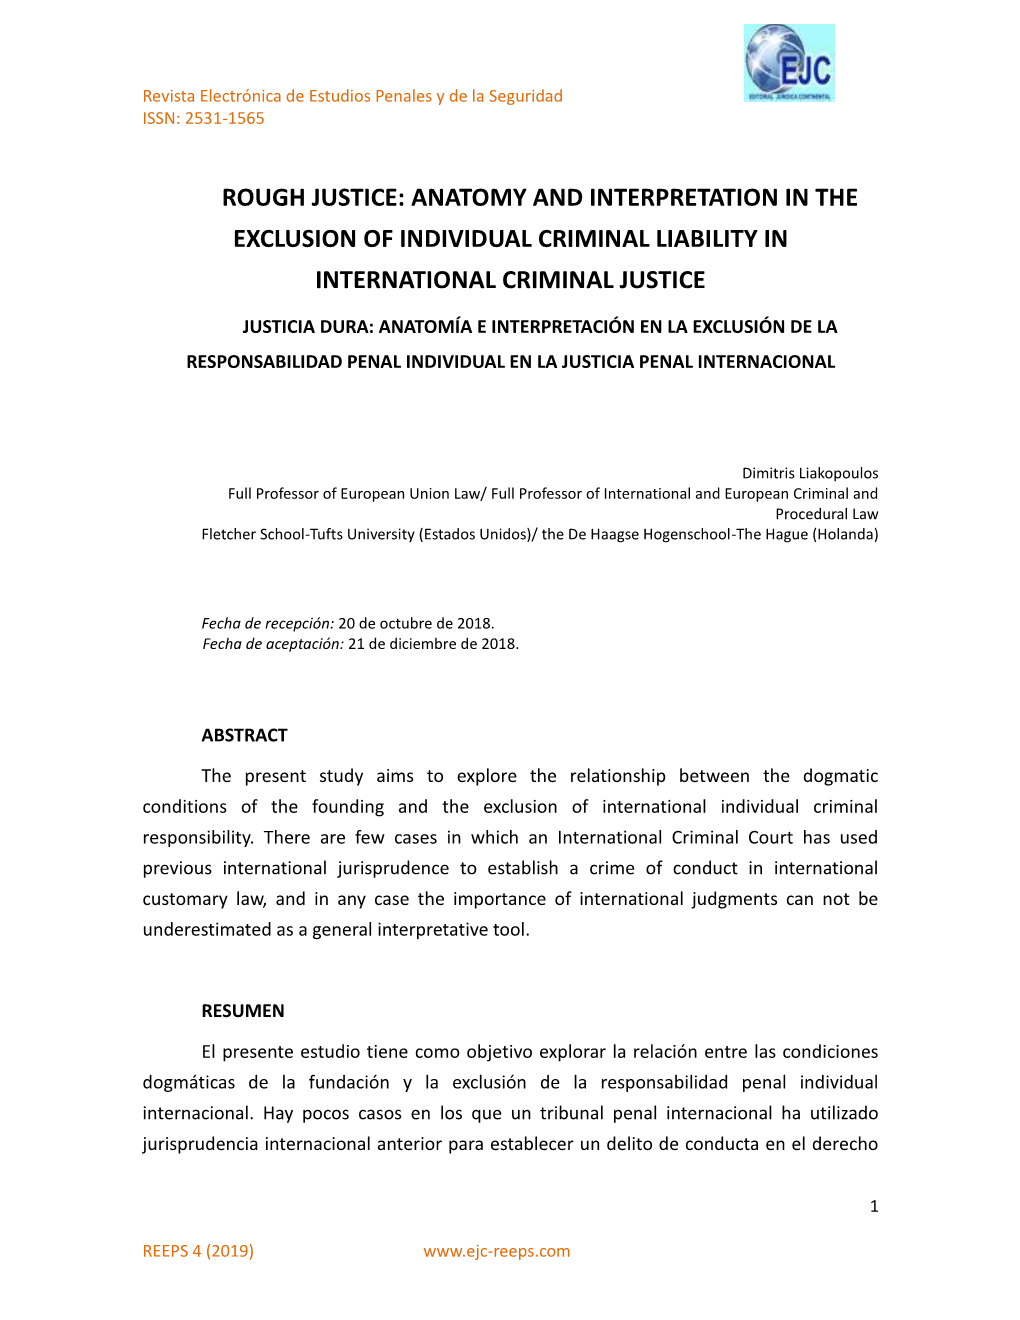 Rough Justice: Anatomy and Interpretation in the Exclusion of Individual Criminal Liability in International Criminal Justice